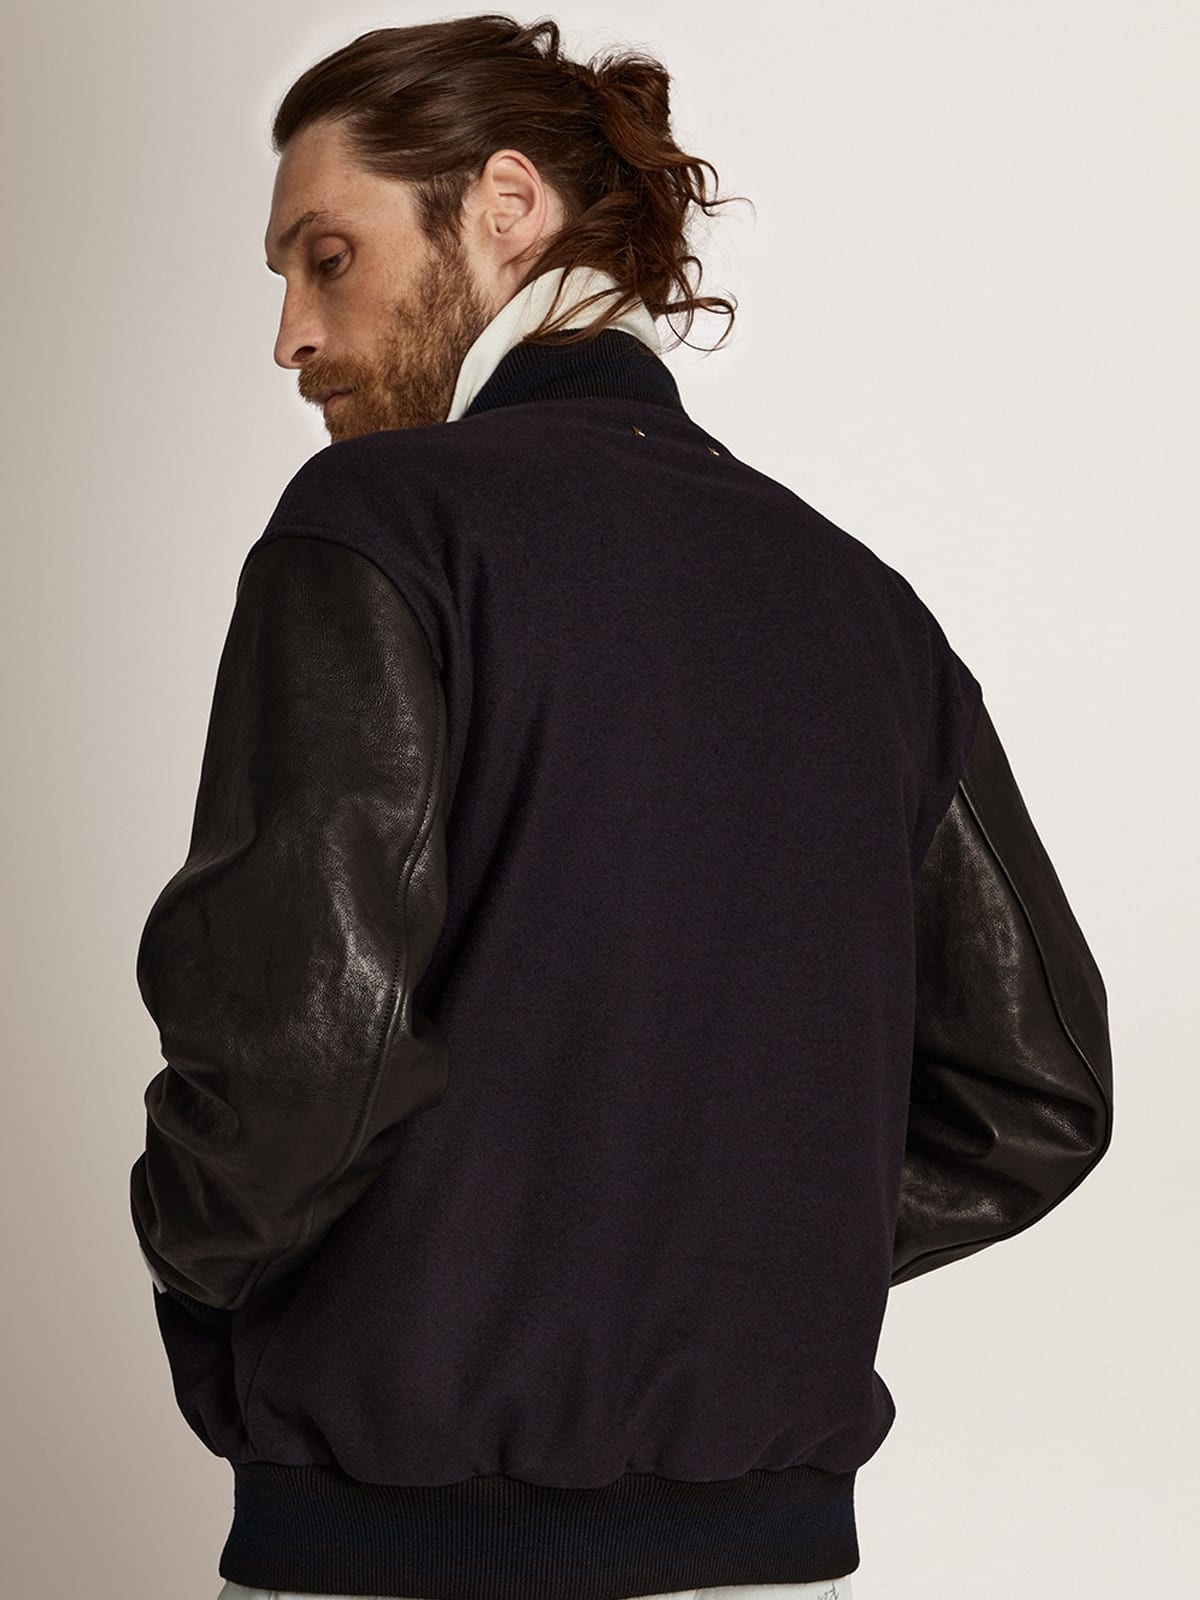 Men's bomber jacket in dark blue wool with leather sleeves - 4